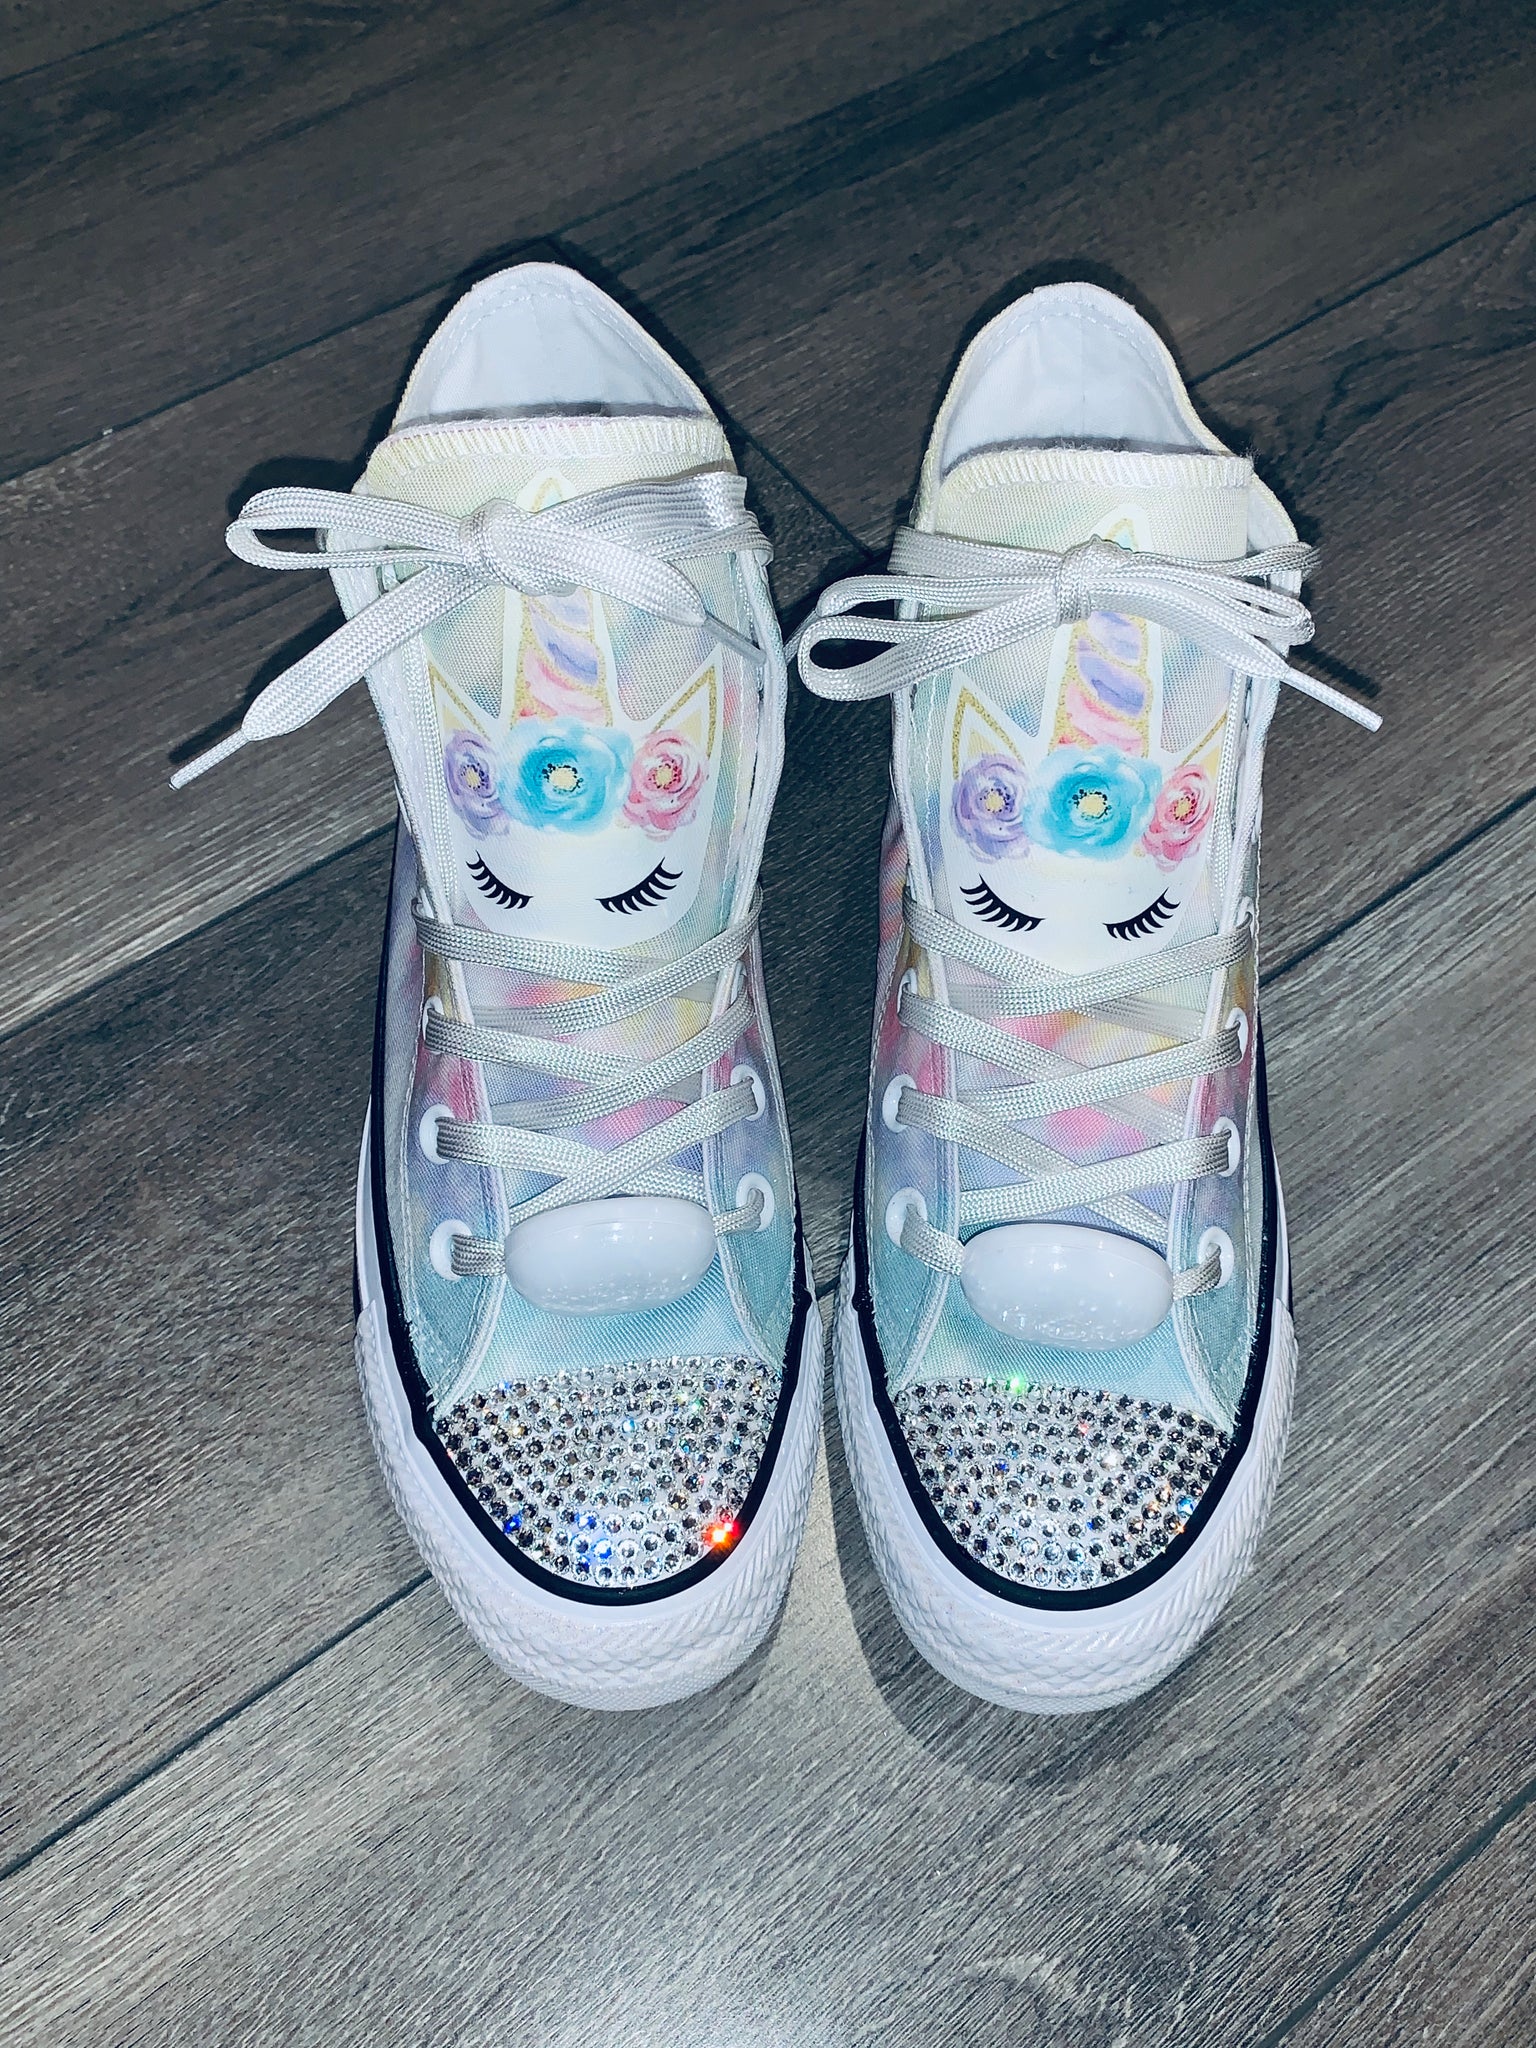 bedazzled baby girl converse